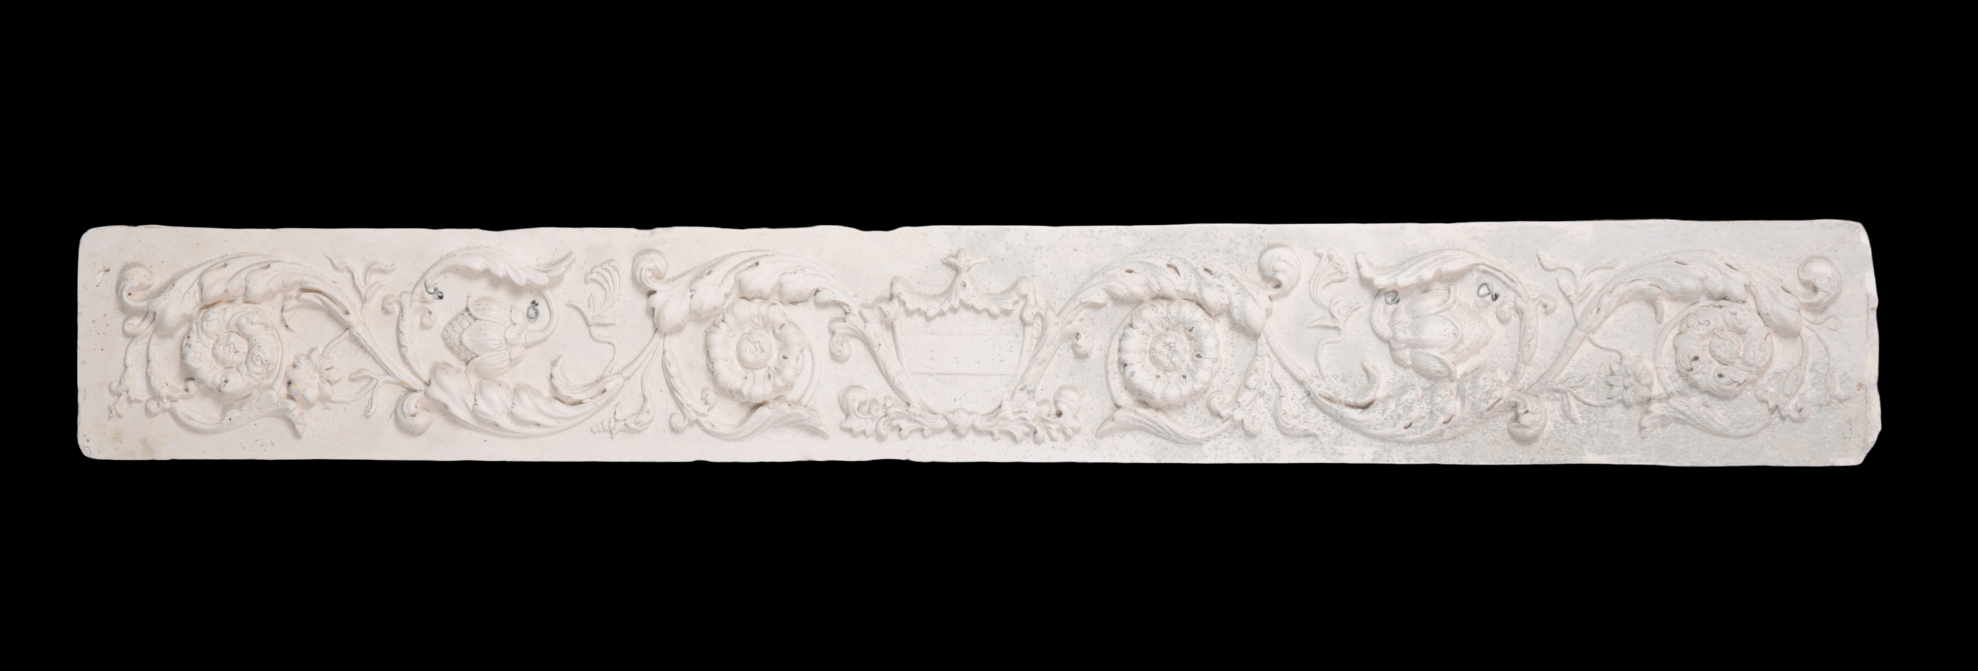 A GROUP OF FIVE PLASTER FRIEZE MOULDINGS - Image 6 of 6